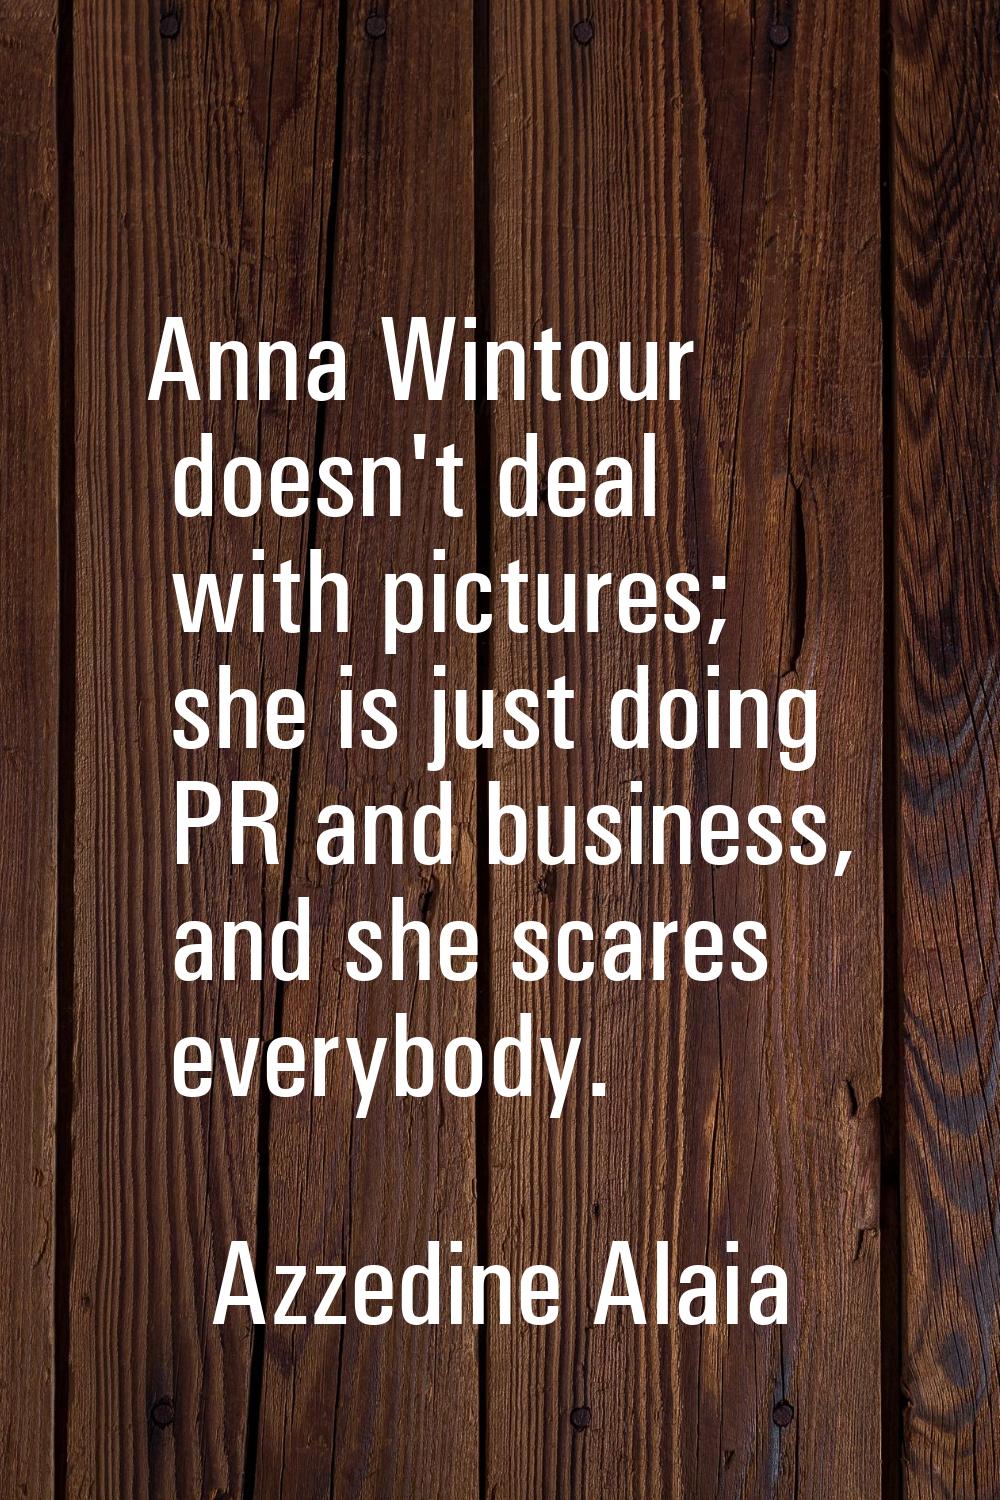 Anna Wintour doesn't deal with pictures; she is just doing PR and business, and she scares everybod